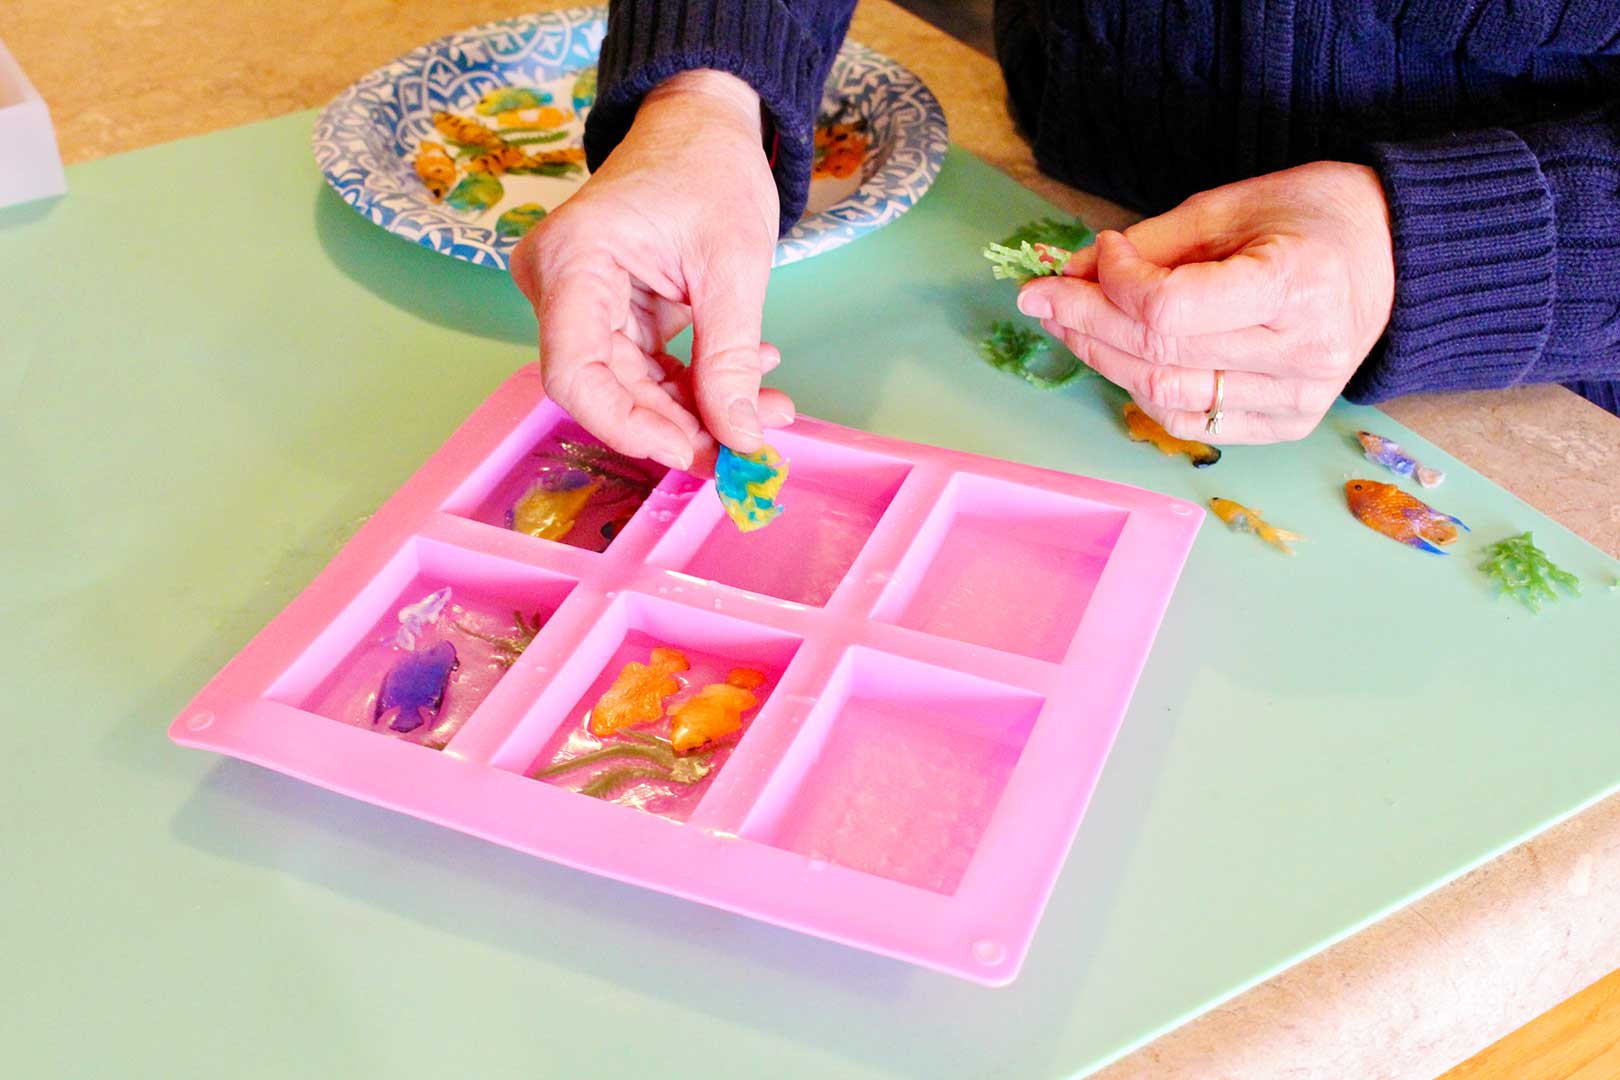 Hands placing plastic tropical fish into clear soap layer inside the pink silicone rectangular soap molds.